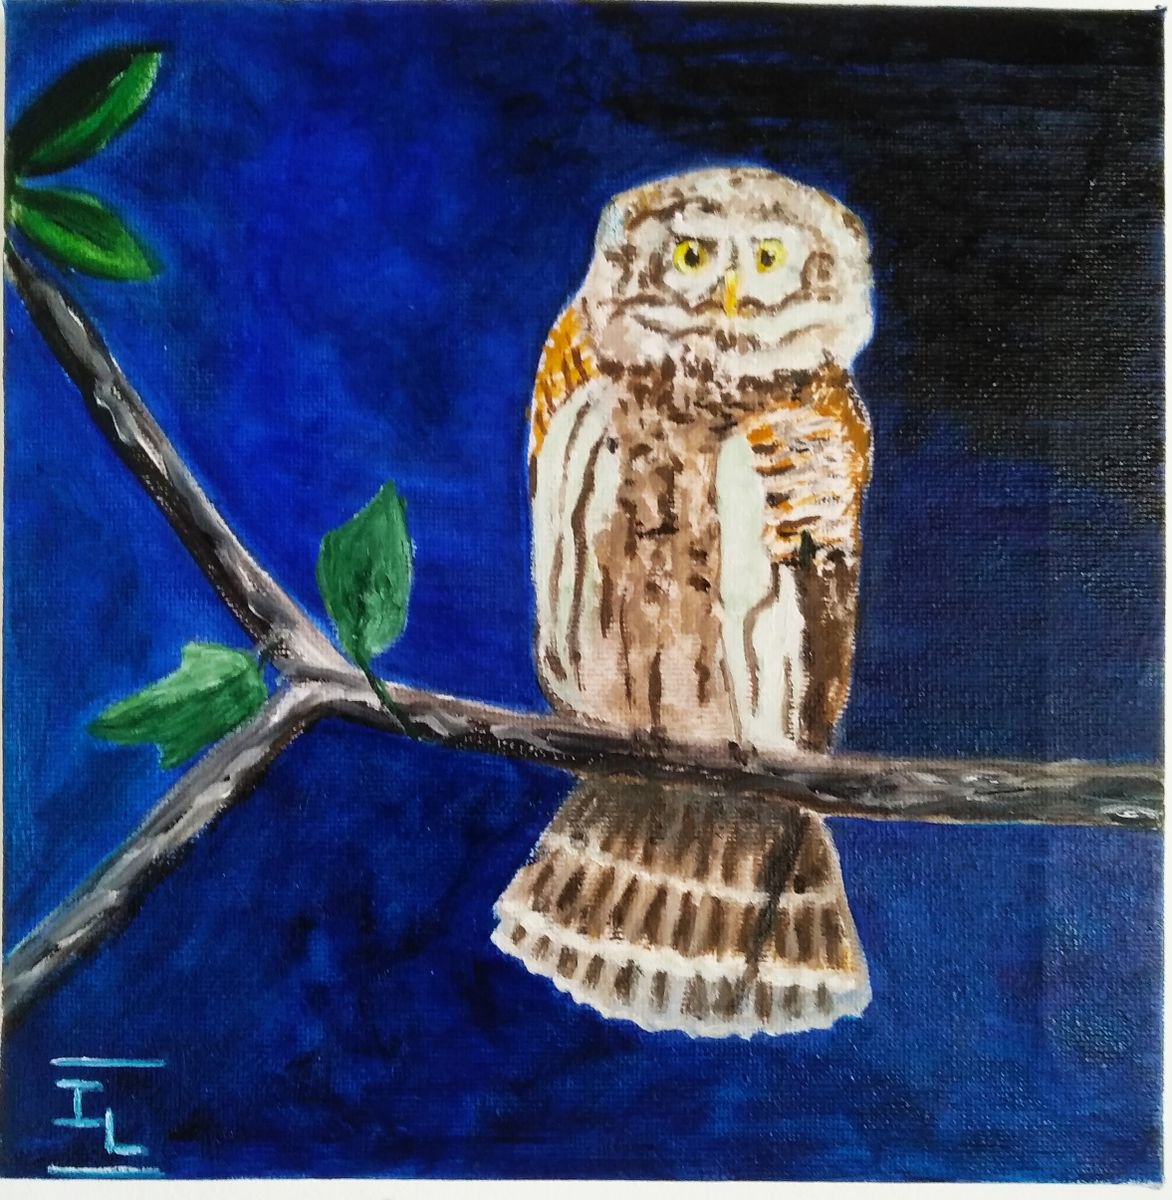 The little owl 2 by Isabelle Lucas